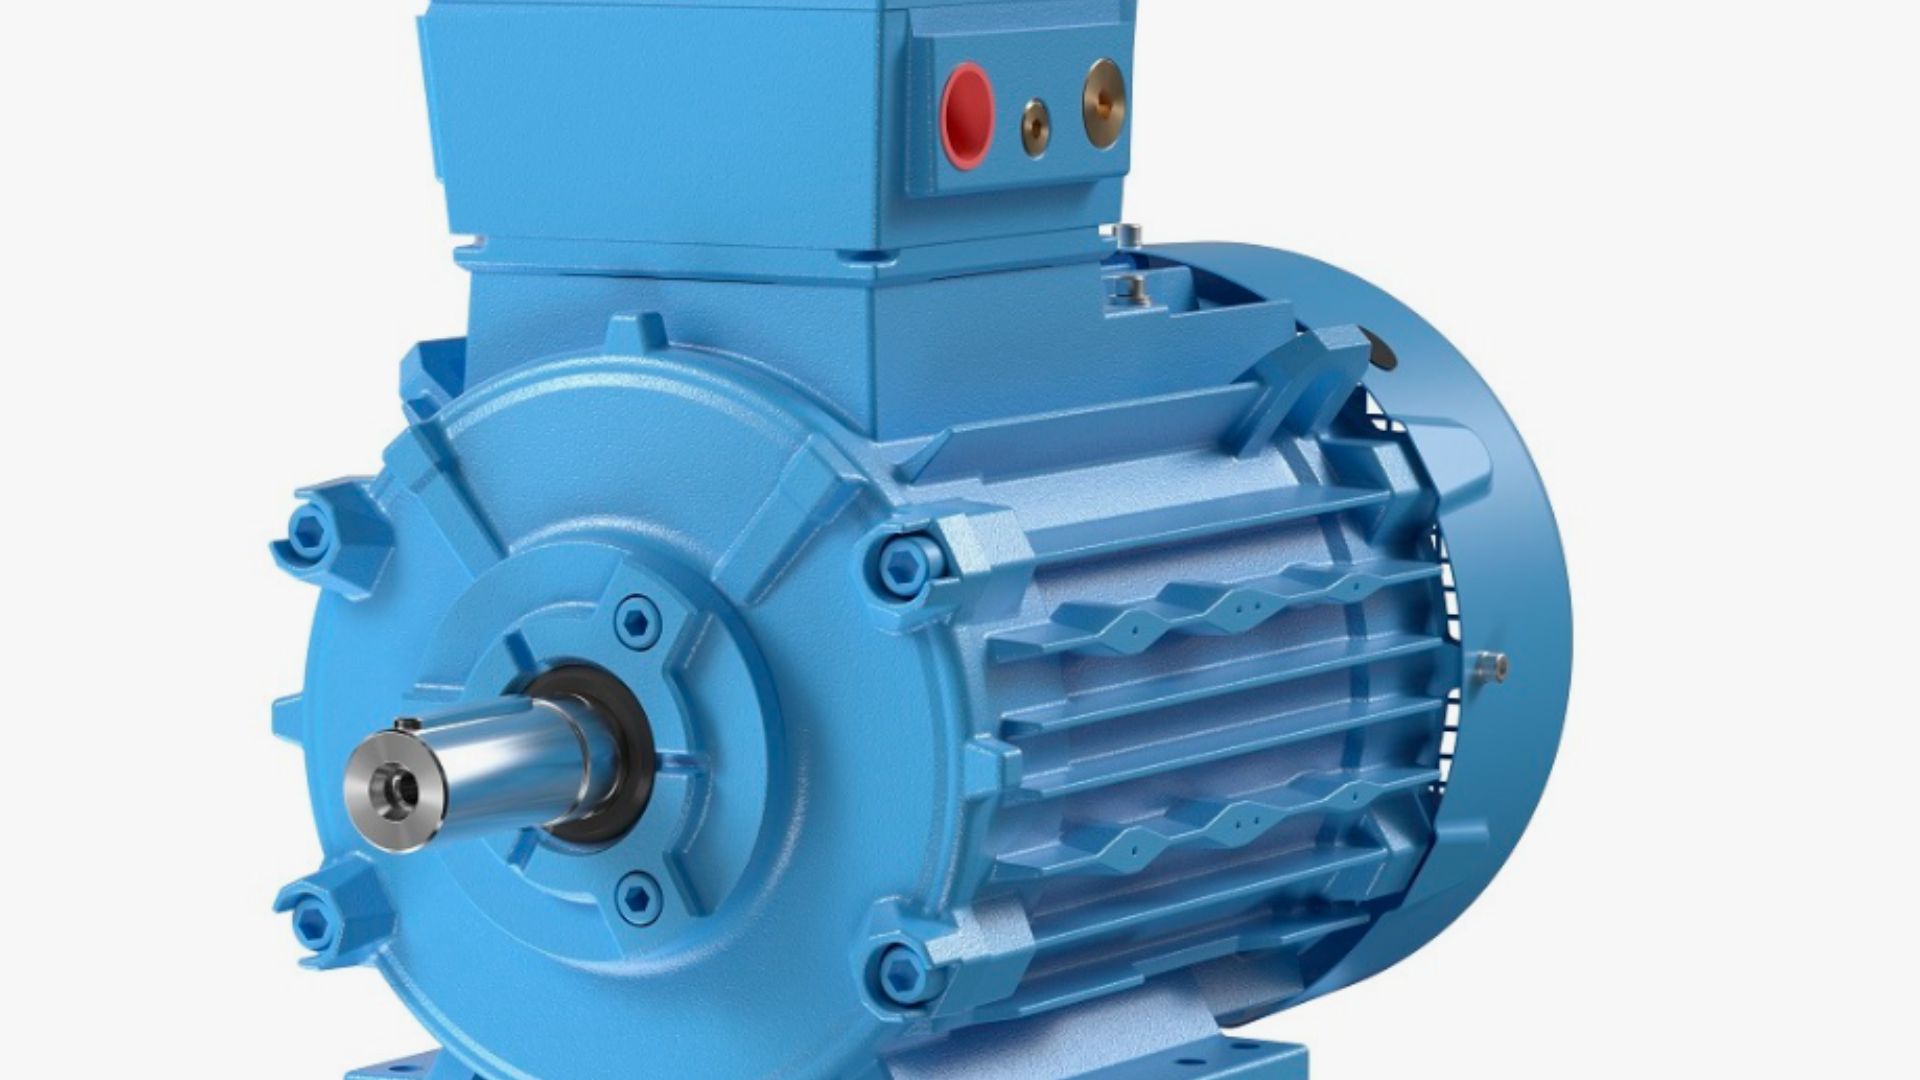 Know thе Ins and Outs of Explosion Proof Motors 